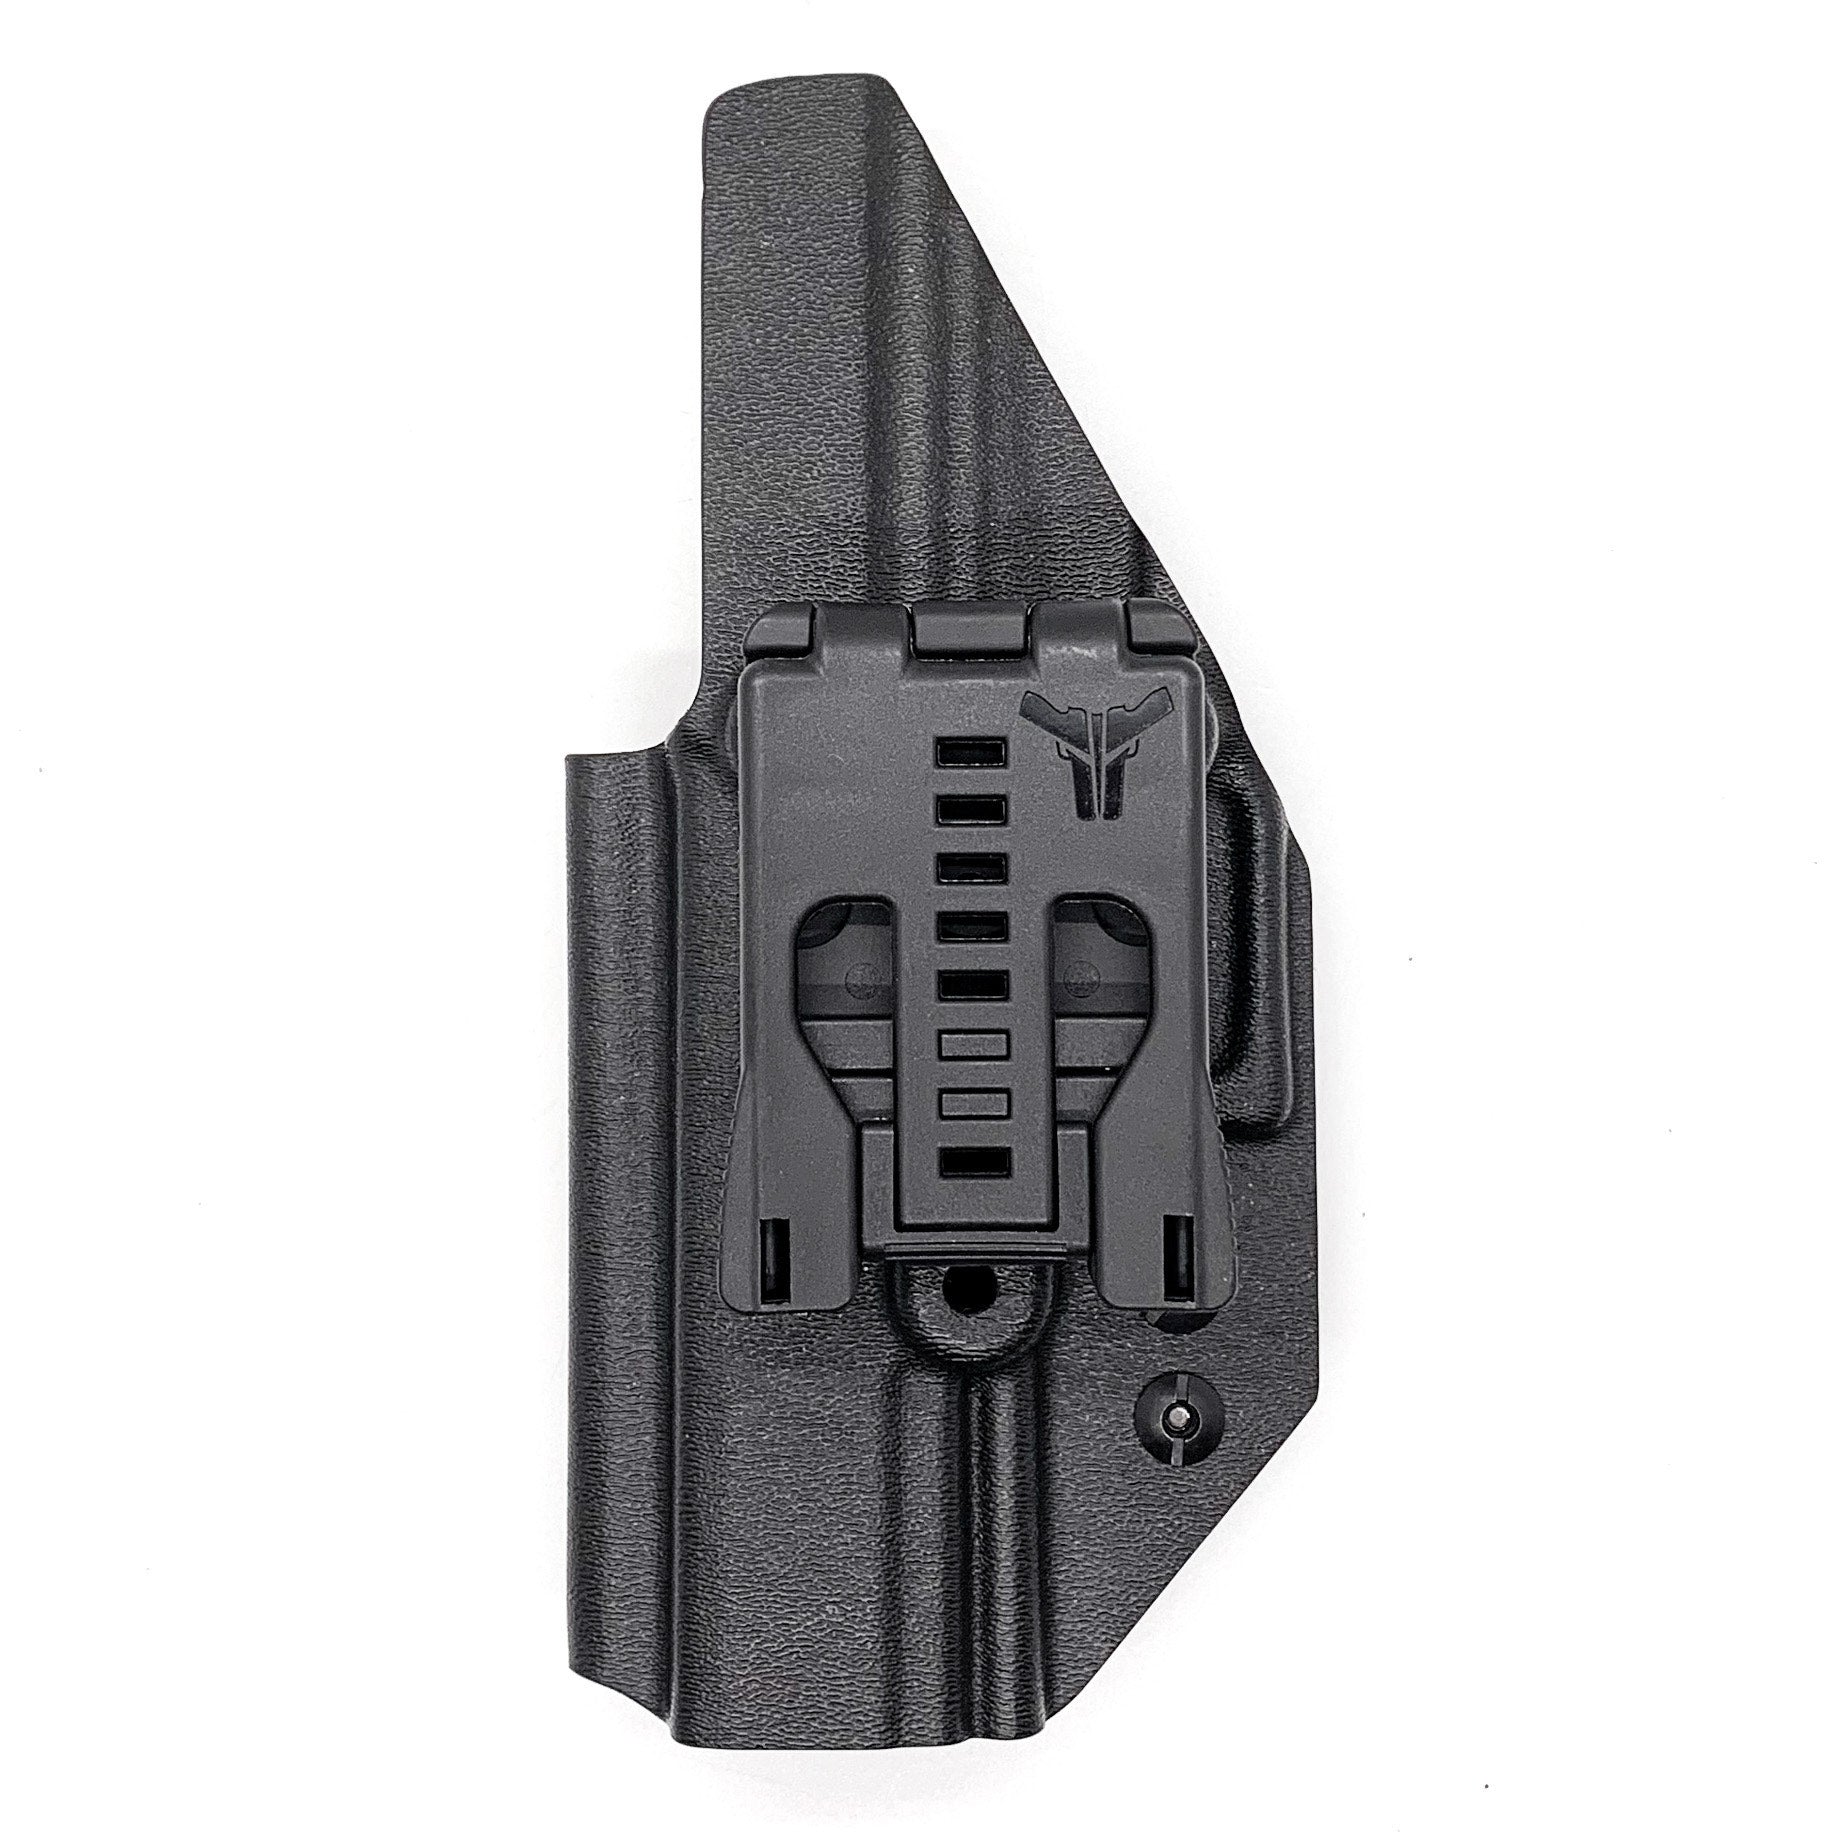 For the best Outside Waistband Taco Style Holster designed to fit the Walther PDP Pro SD Compact 4.6" pistol with a 4" slide and 4.6" threaded barrel shop Four Brothers Holsters.  Holster profile is cut to allow red dot sights to be mounted on the pistol.  Full sweat guard, adjustable retention, open muzzle PDP, Pro SD